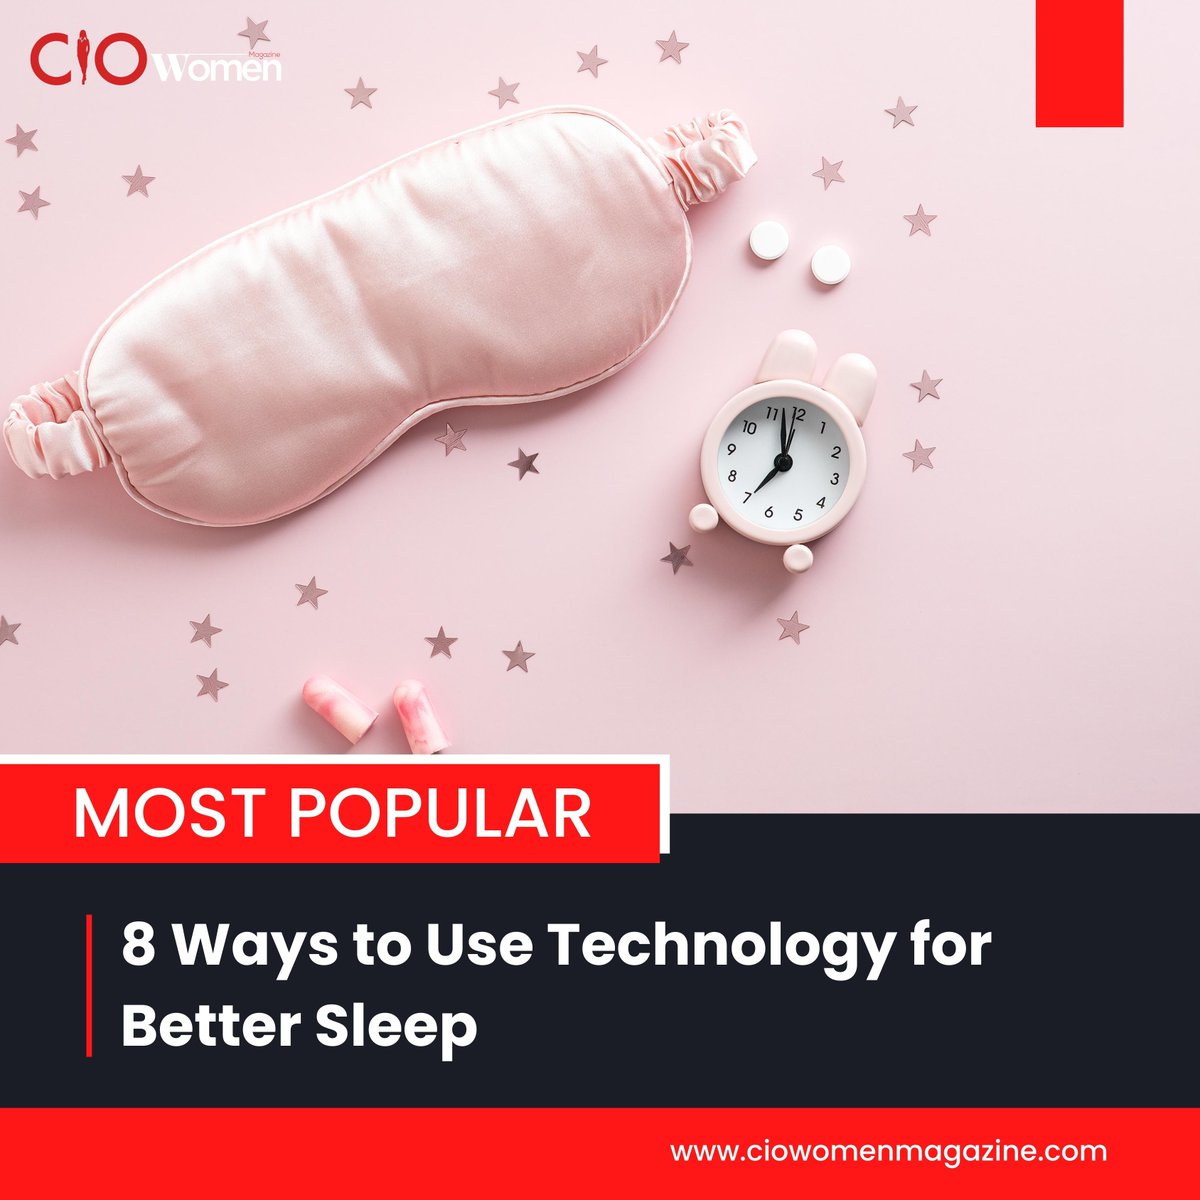 Restful nights are just a click away! Embrace the digital age to enhance your sleep quality. Here are 8 ingenious ways technology can lead you to dreamland and wake up refreshed. 💤📱 

#TechForSleep #SweetDreamsAhead #sleep #bettersleep #success #meditation